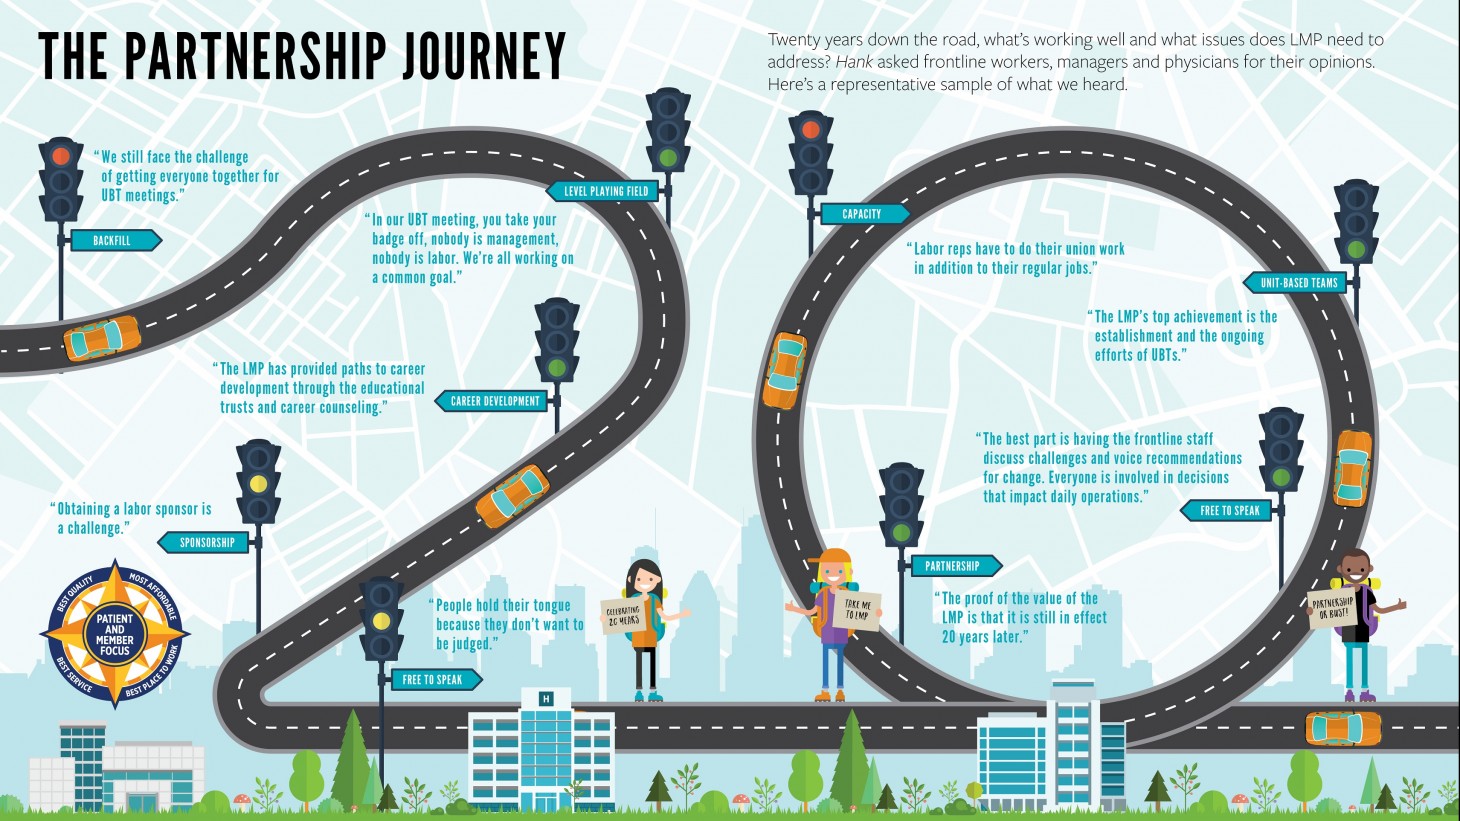 a graphic on 20 years of partnership successes and challenges